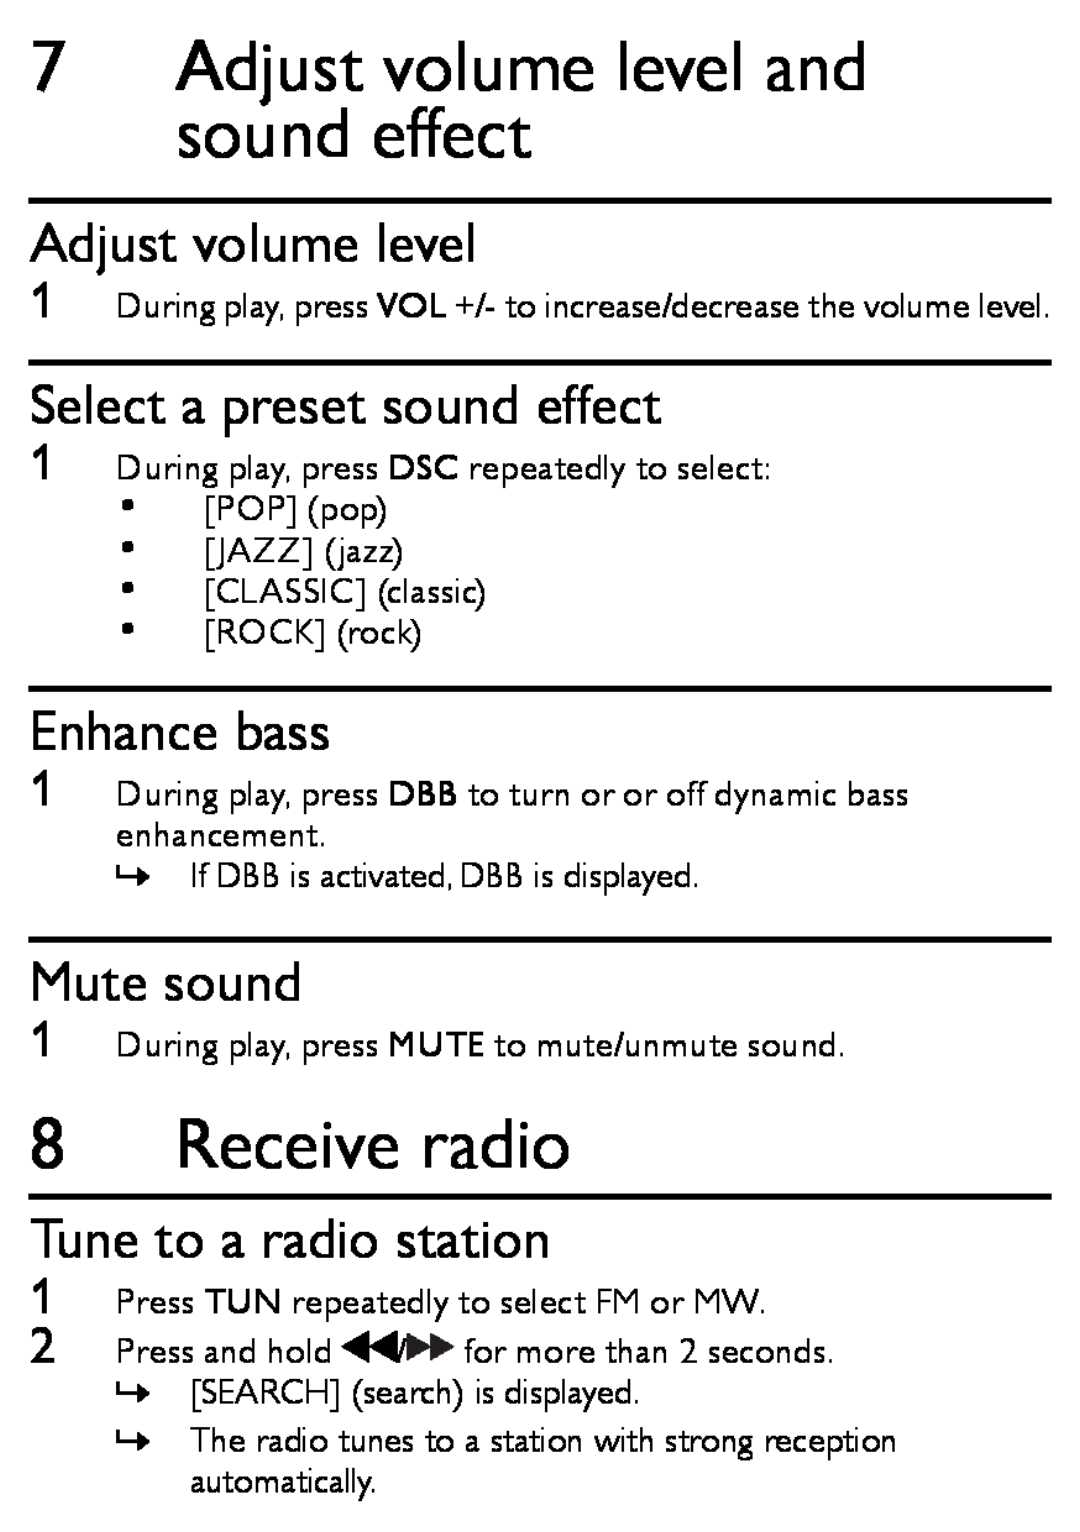 Philips MCM166 user manual 7Adjust volume level and sound effect, Receive radio, Select a preset sound effect, Enhance bass 